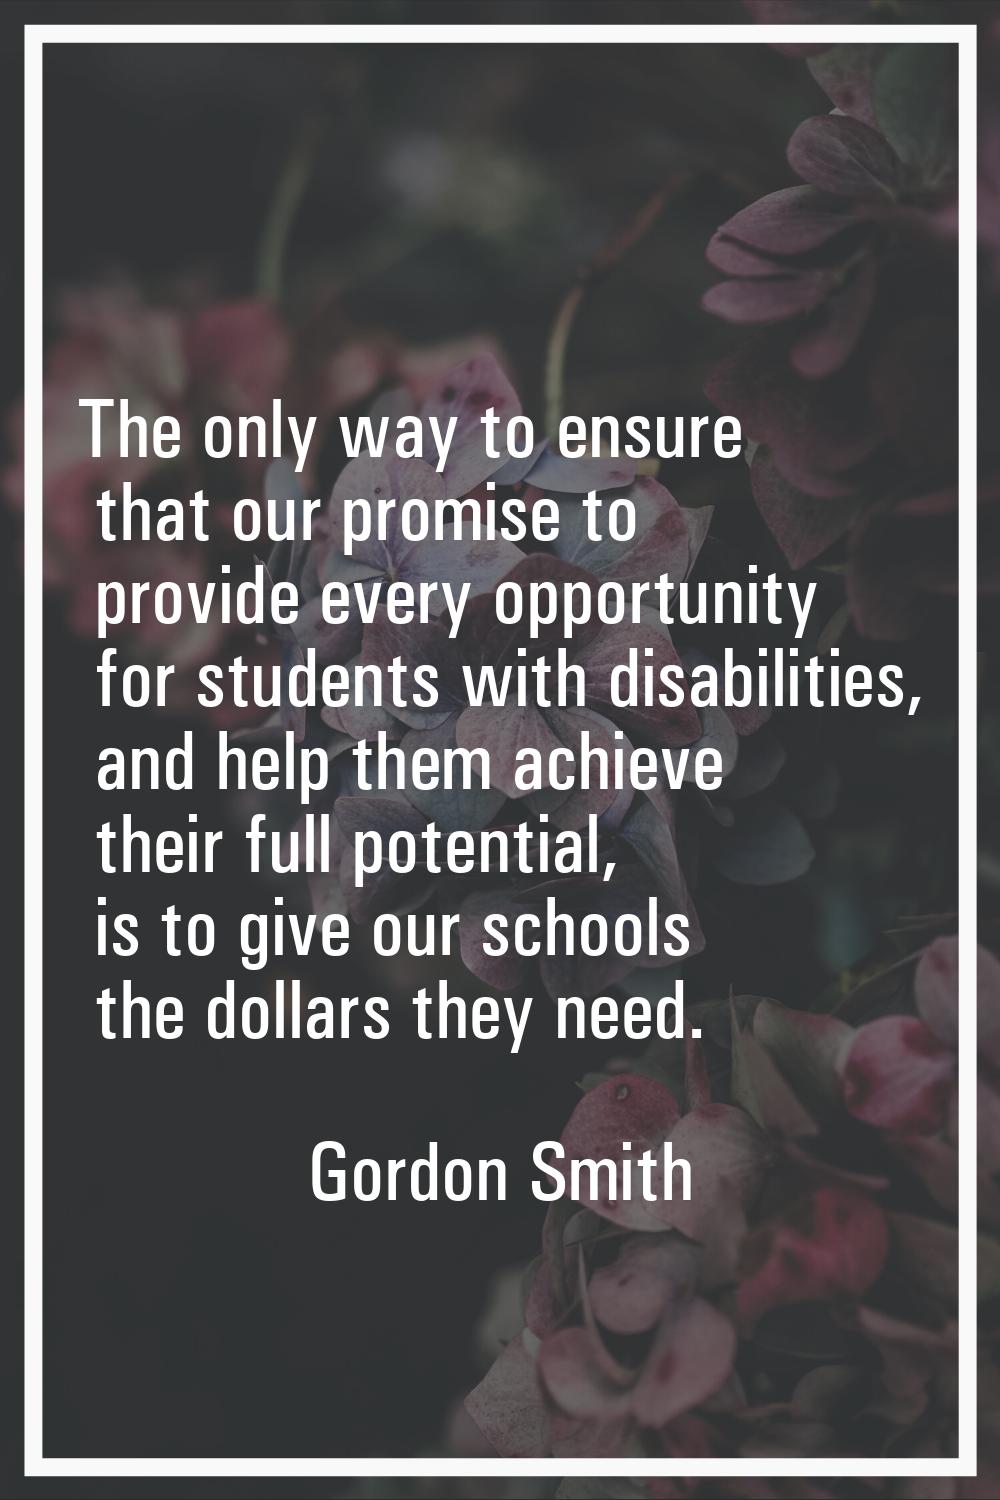 The only way to ensure that our promise to provide every opportunity for students with disabilities